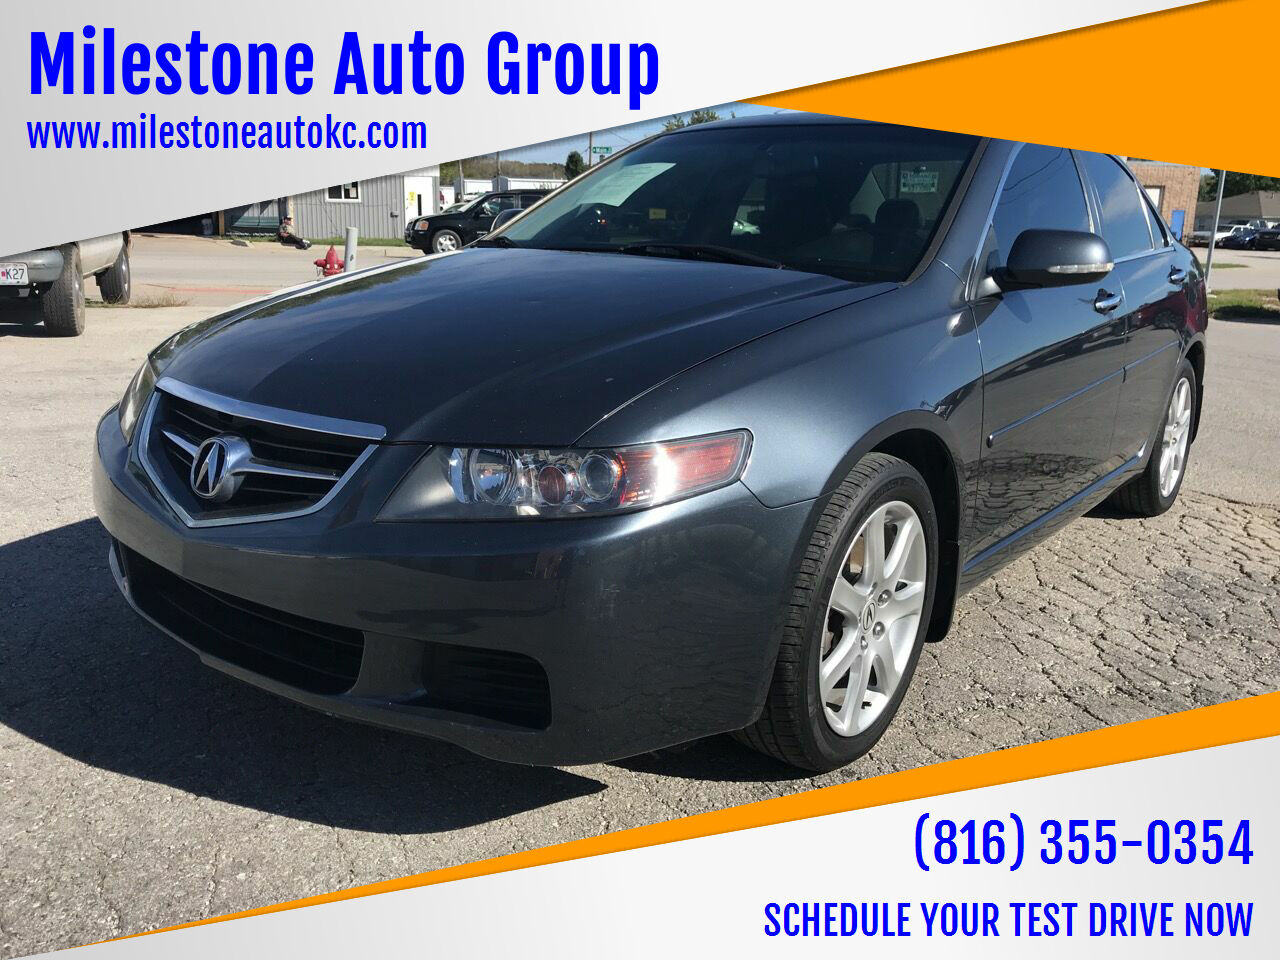 Used 04 Acura Tsx For Sale Carsforsale Com